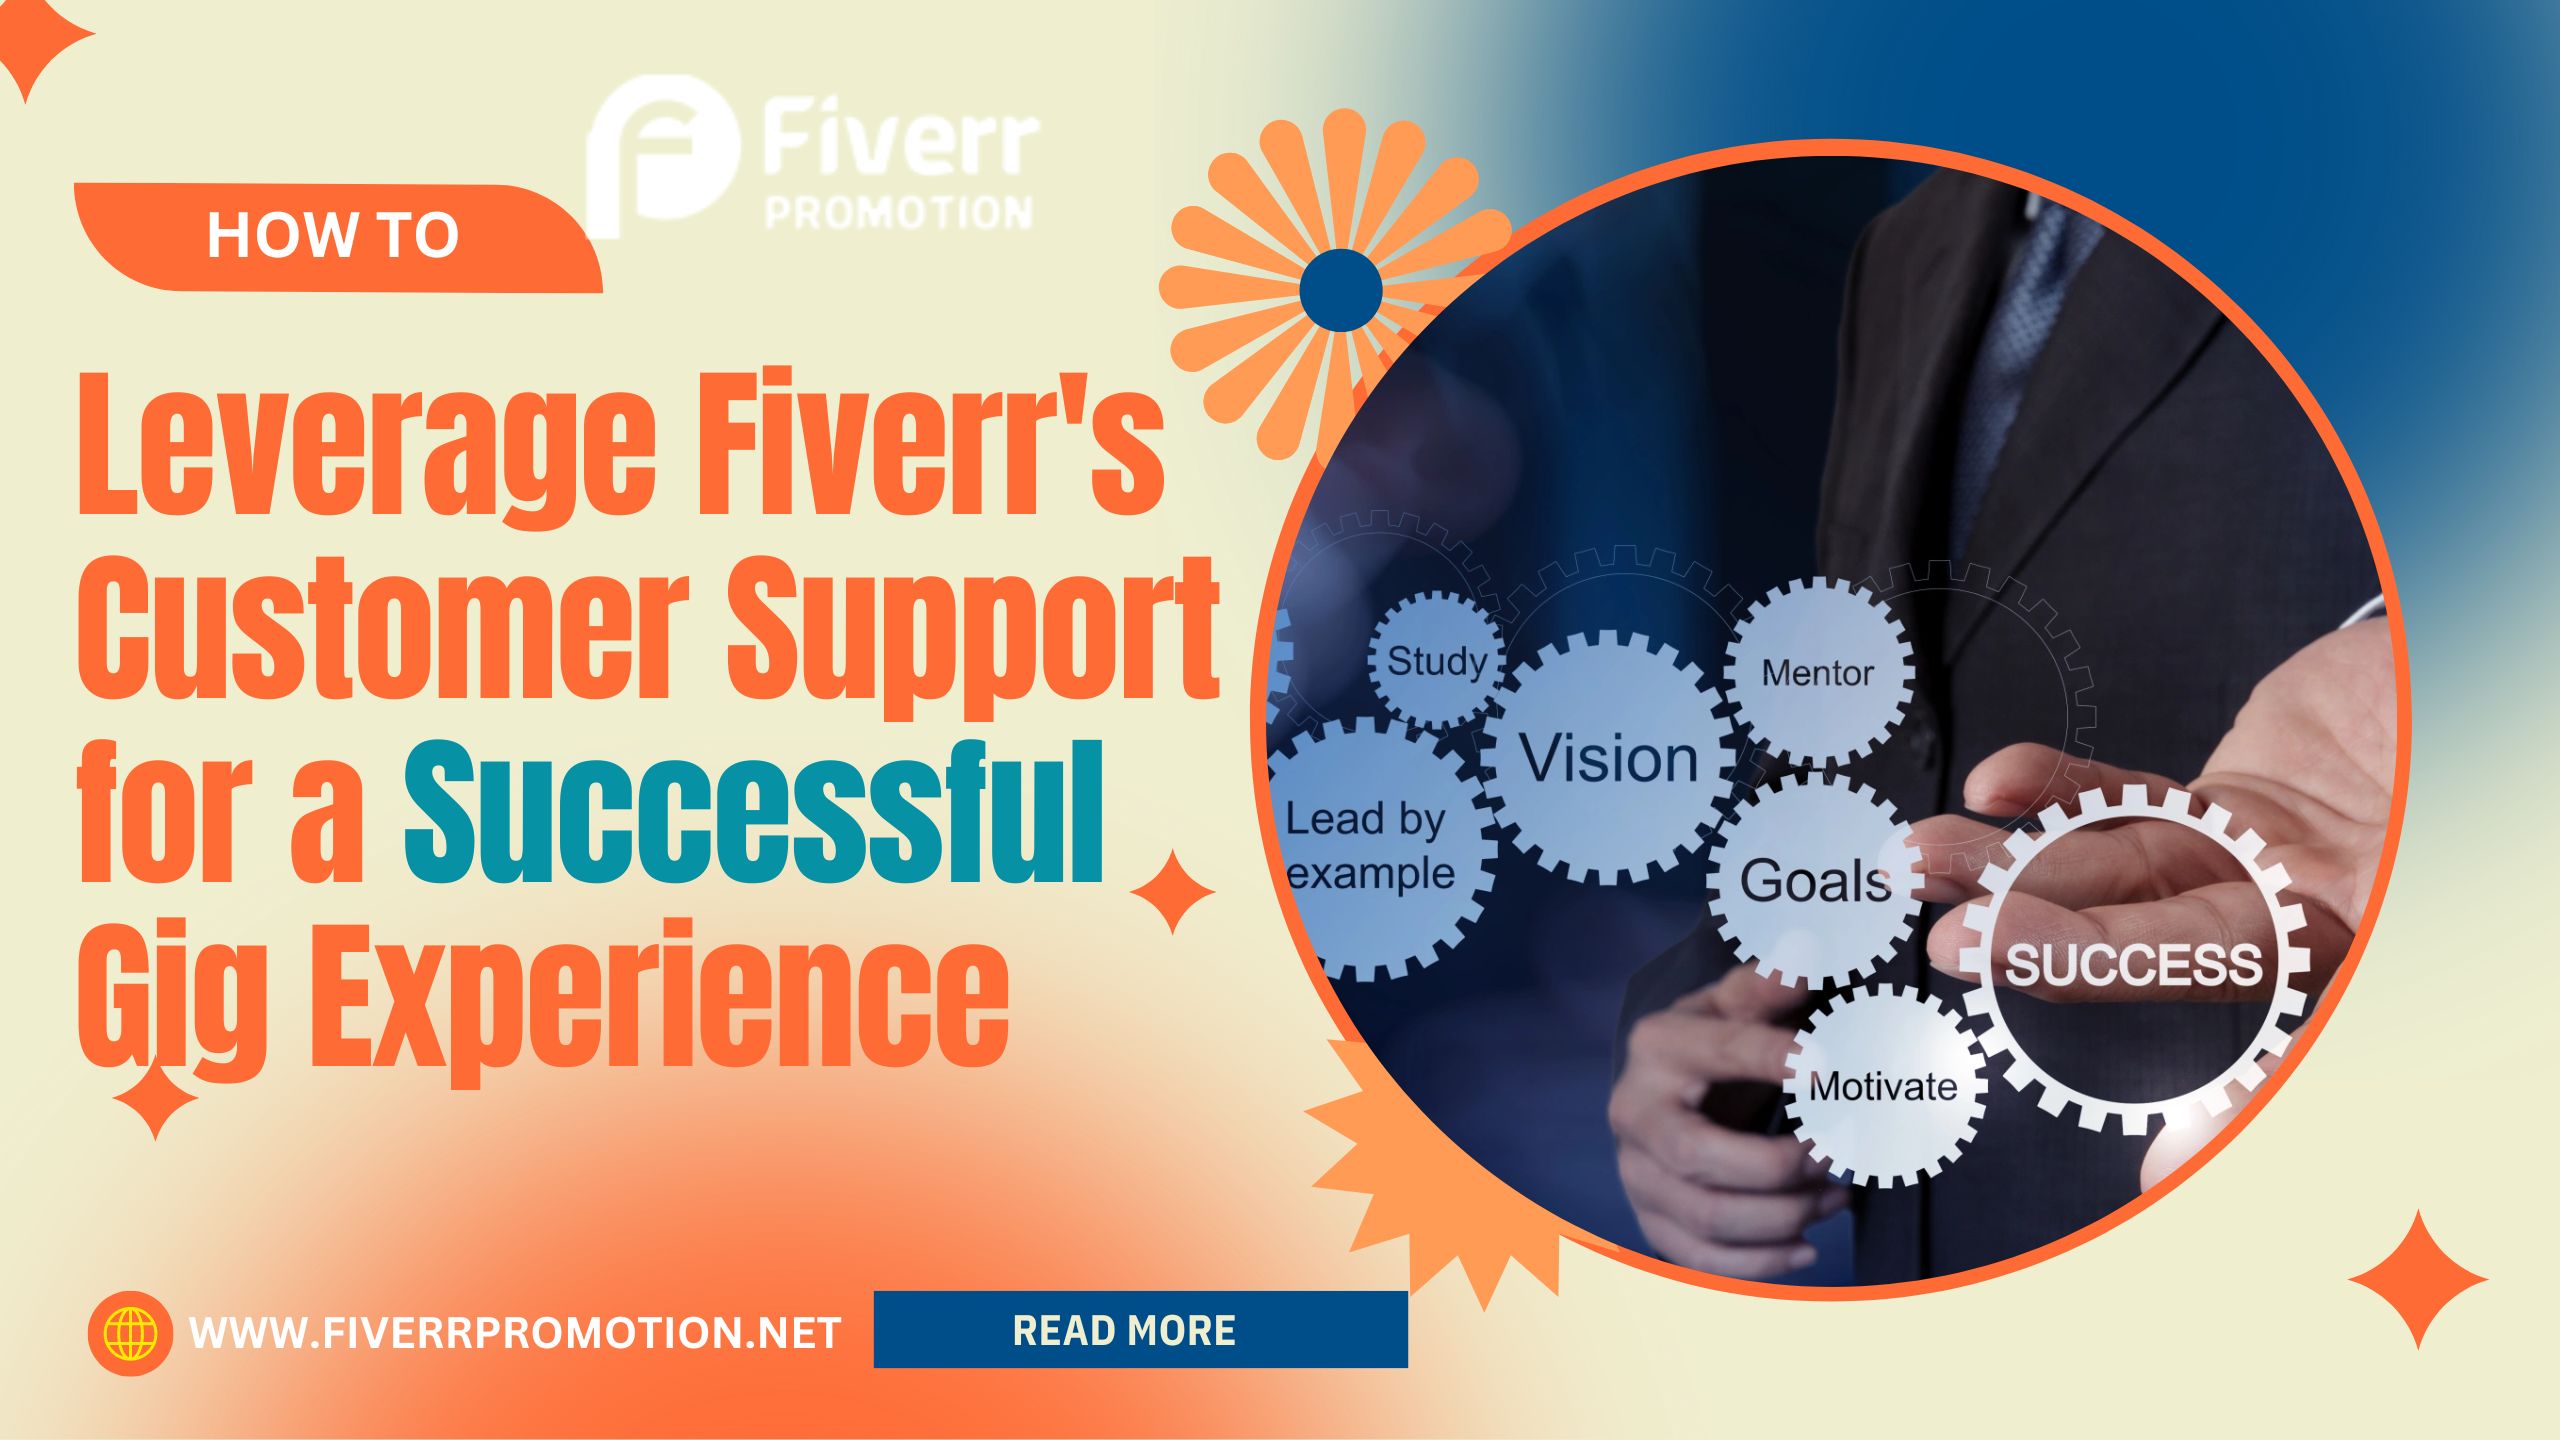 How to Leverage Fiverr’s Customer Support for a Successful Gig Experience